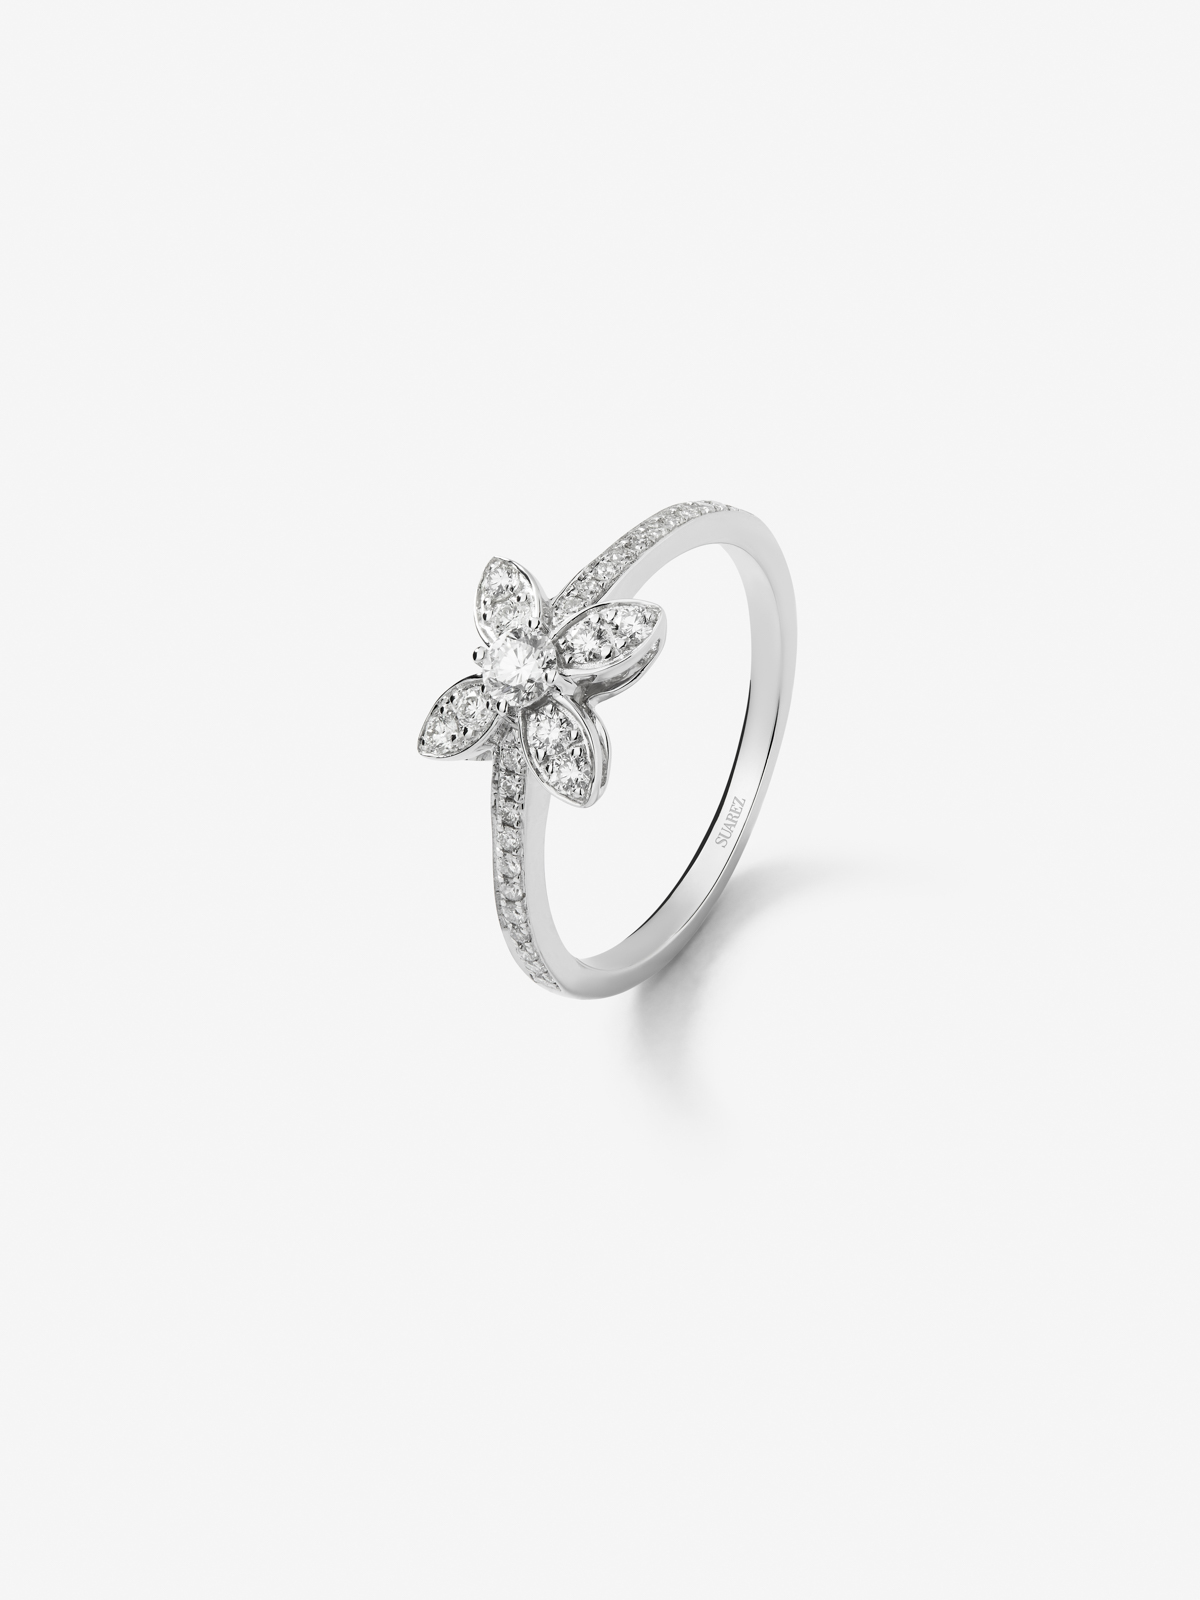 18K white gold flower ring with white diamonds in 0.34 cts